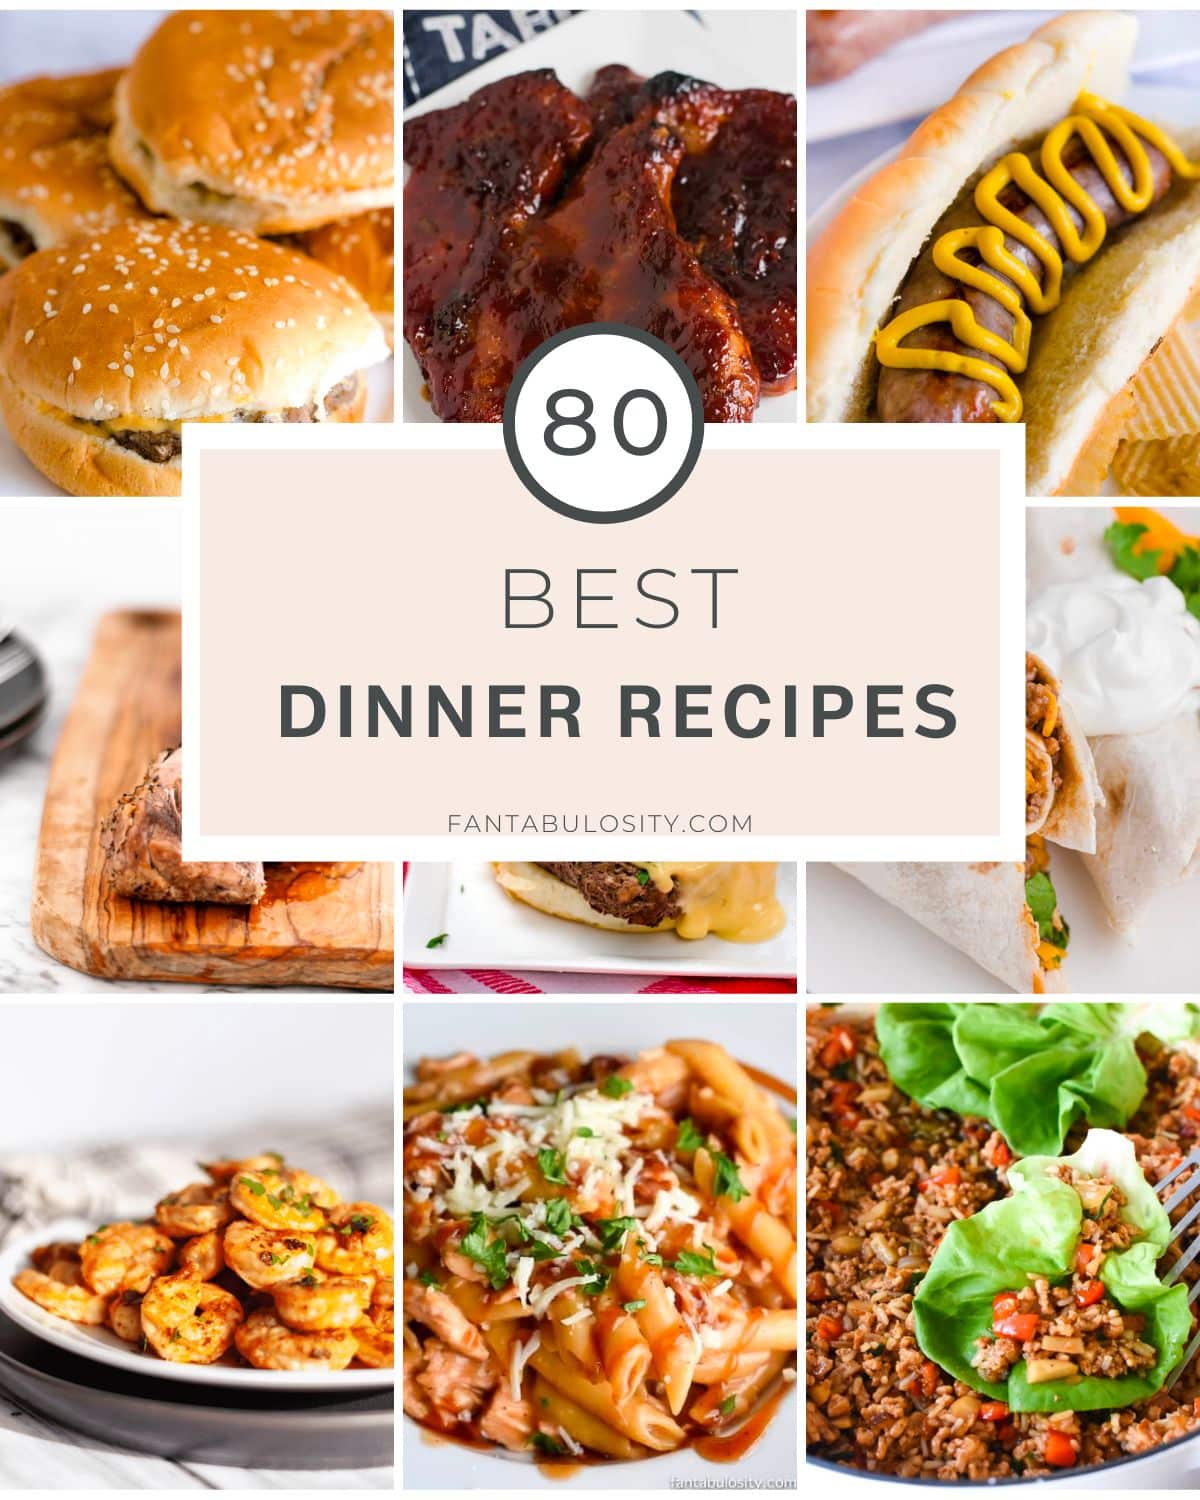 Best dinner recipes image collage.